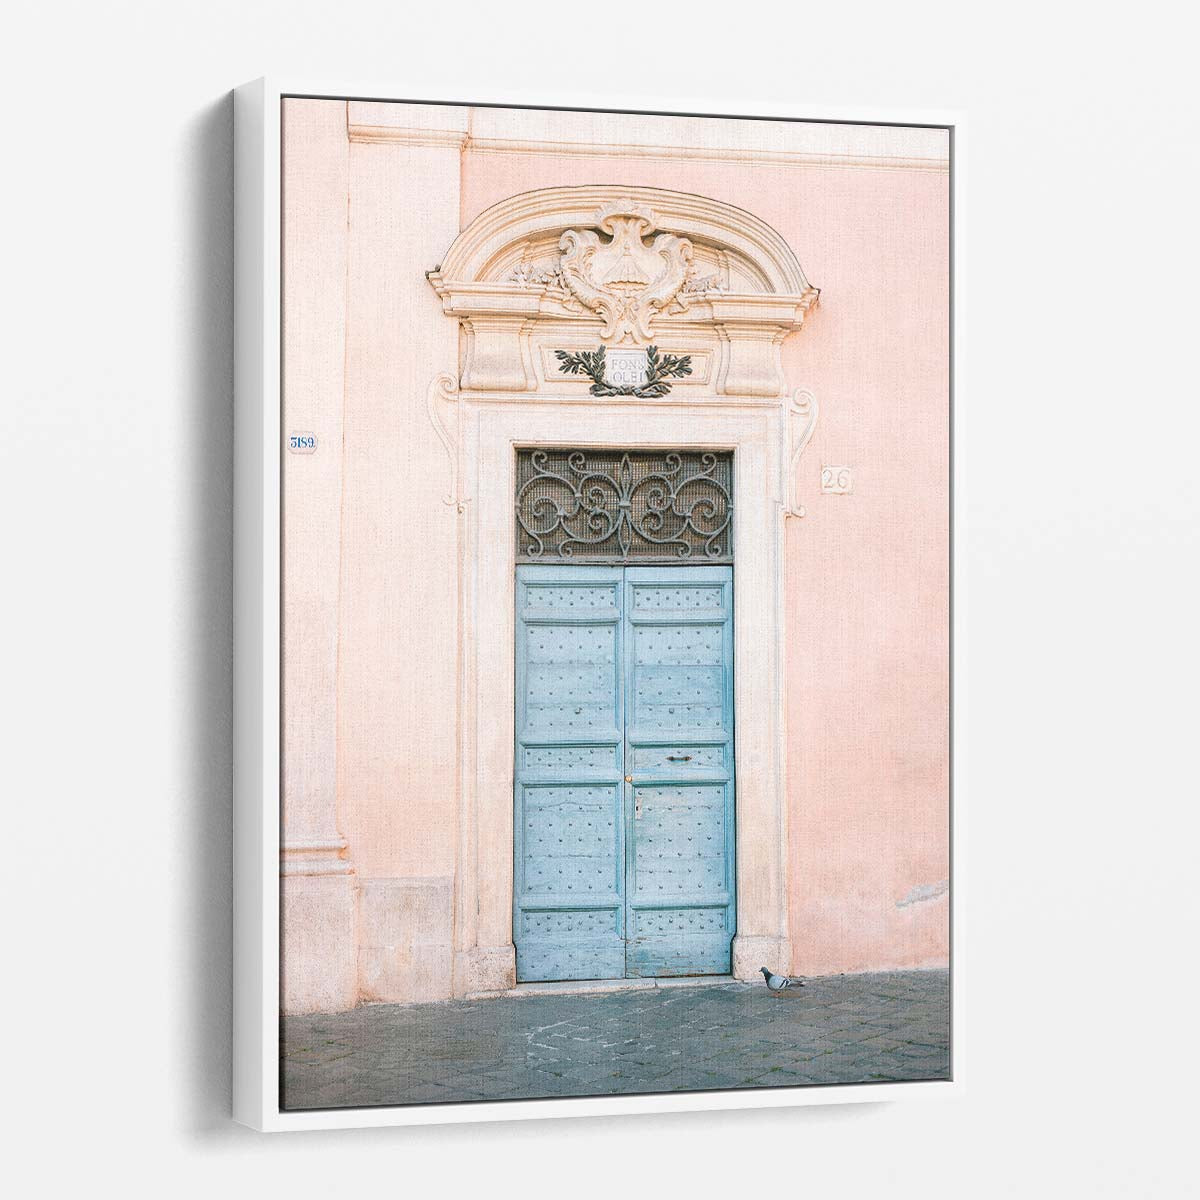 Old Ornate Door Architecture Photography, Rome Italy Wall Art by Luxuriance Designs, made in USA